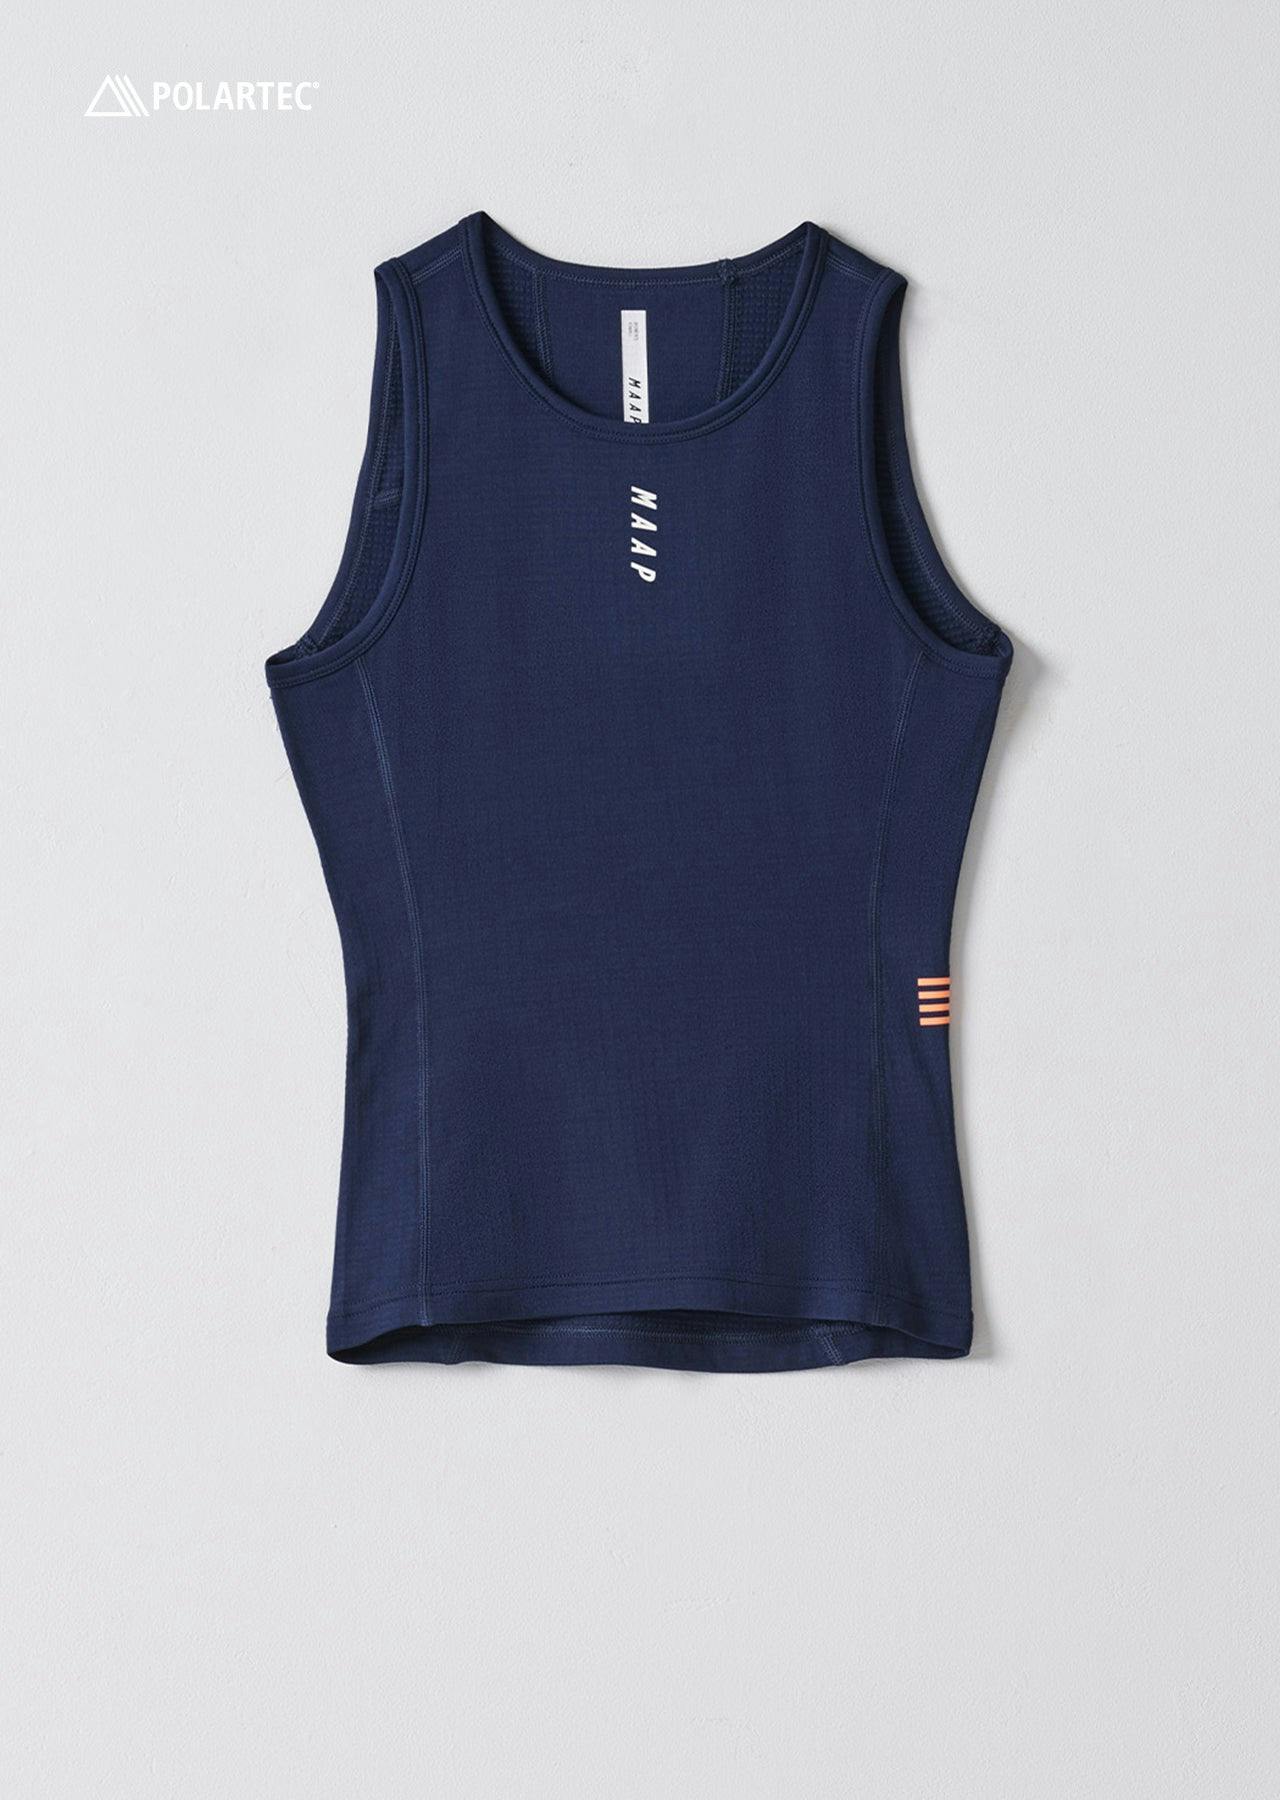 Women's Thermal Base Layer Vest